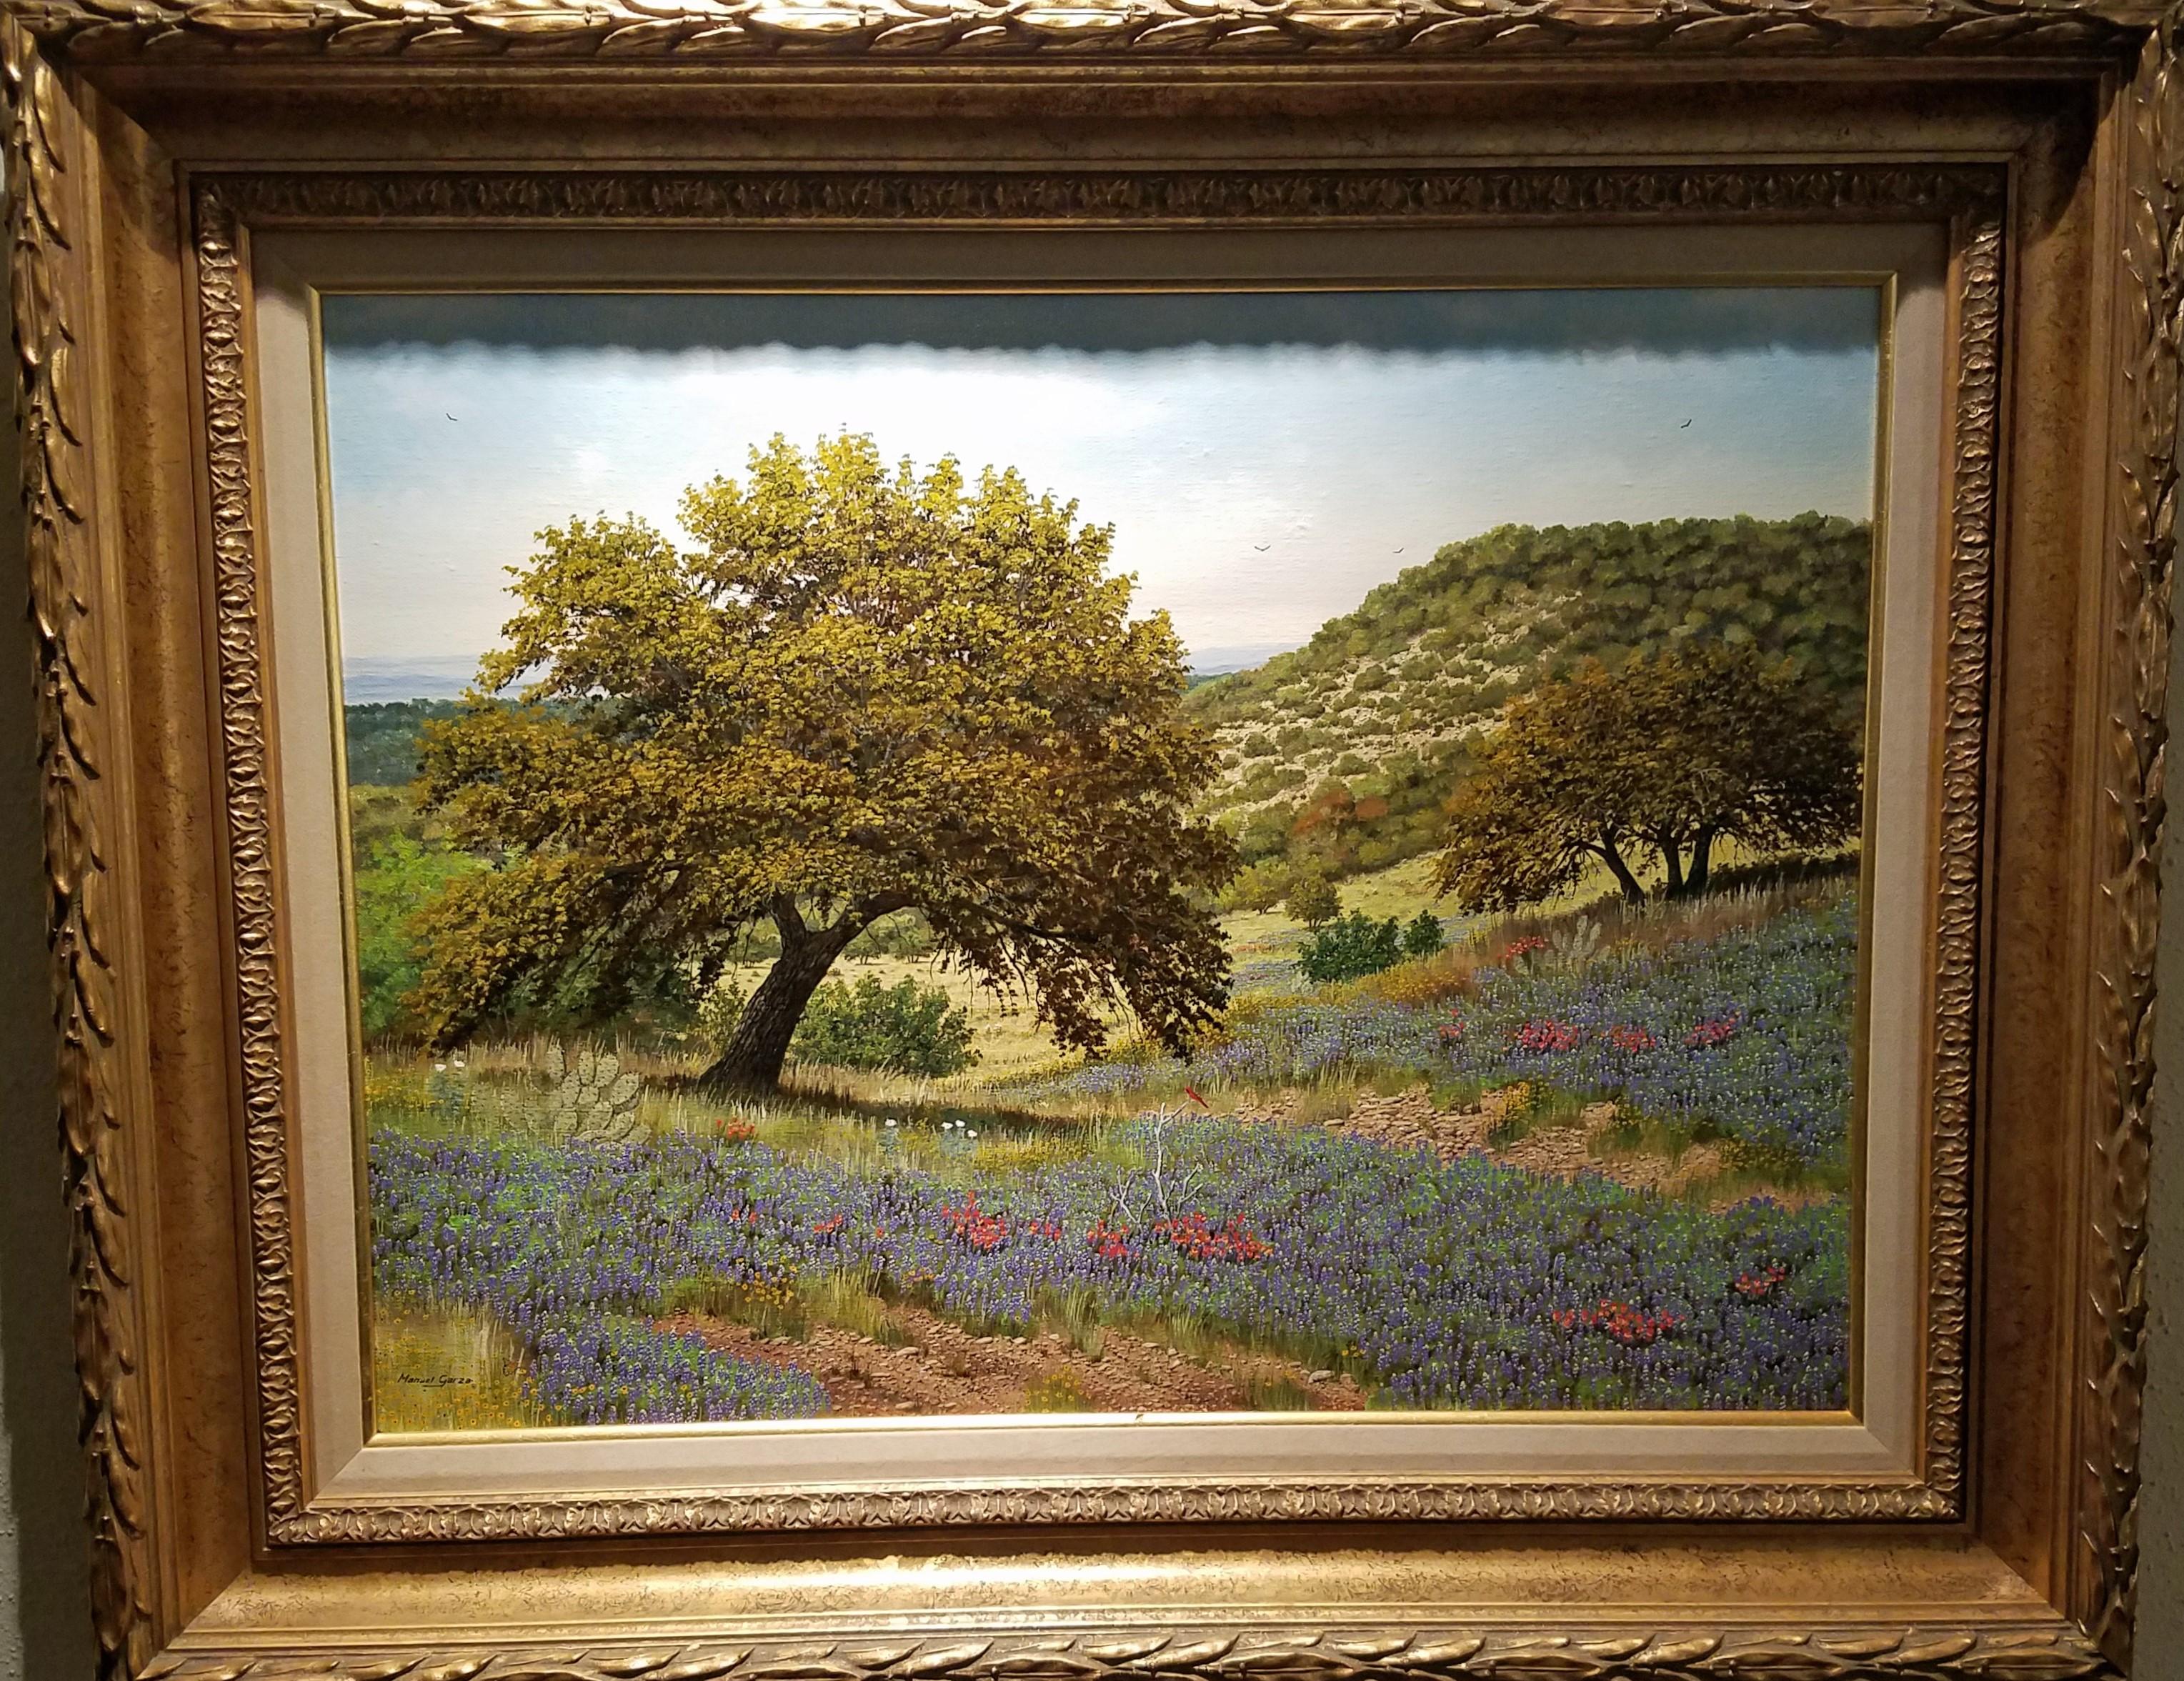 Untitled, Hill Country Landscape with Bluebonnets - Painting by Manuel Garza